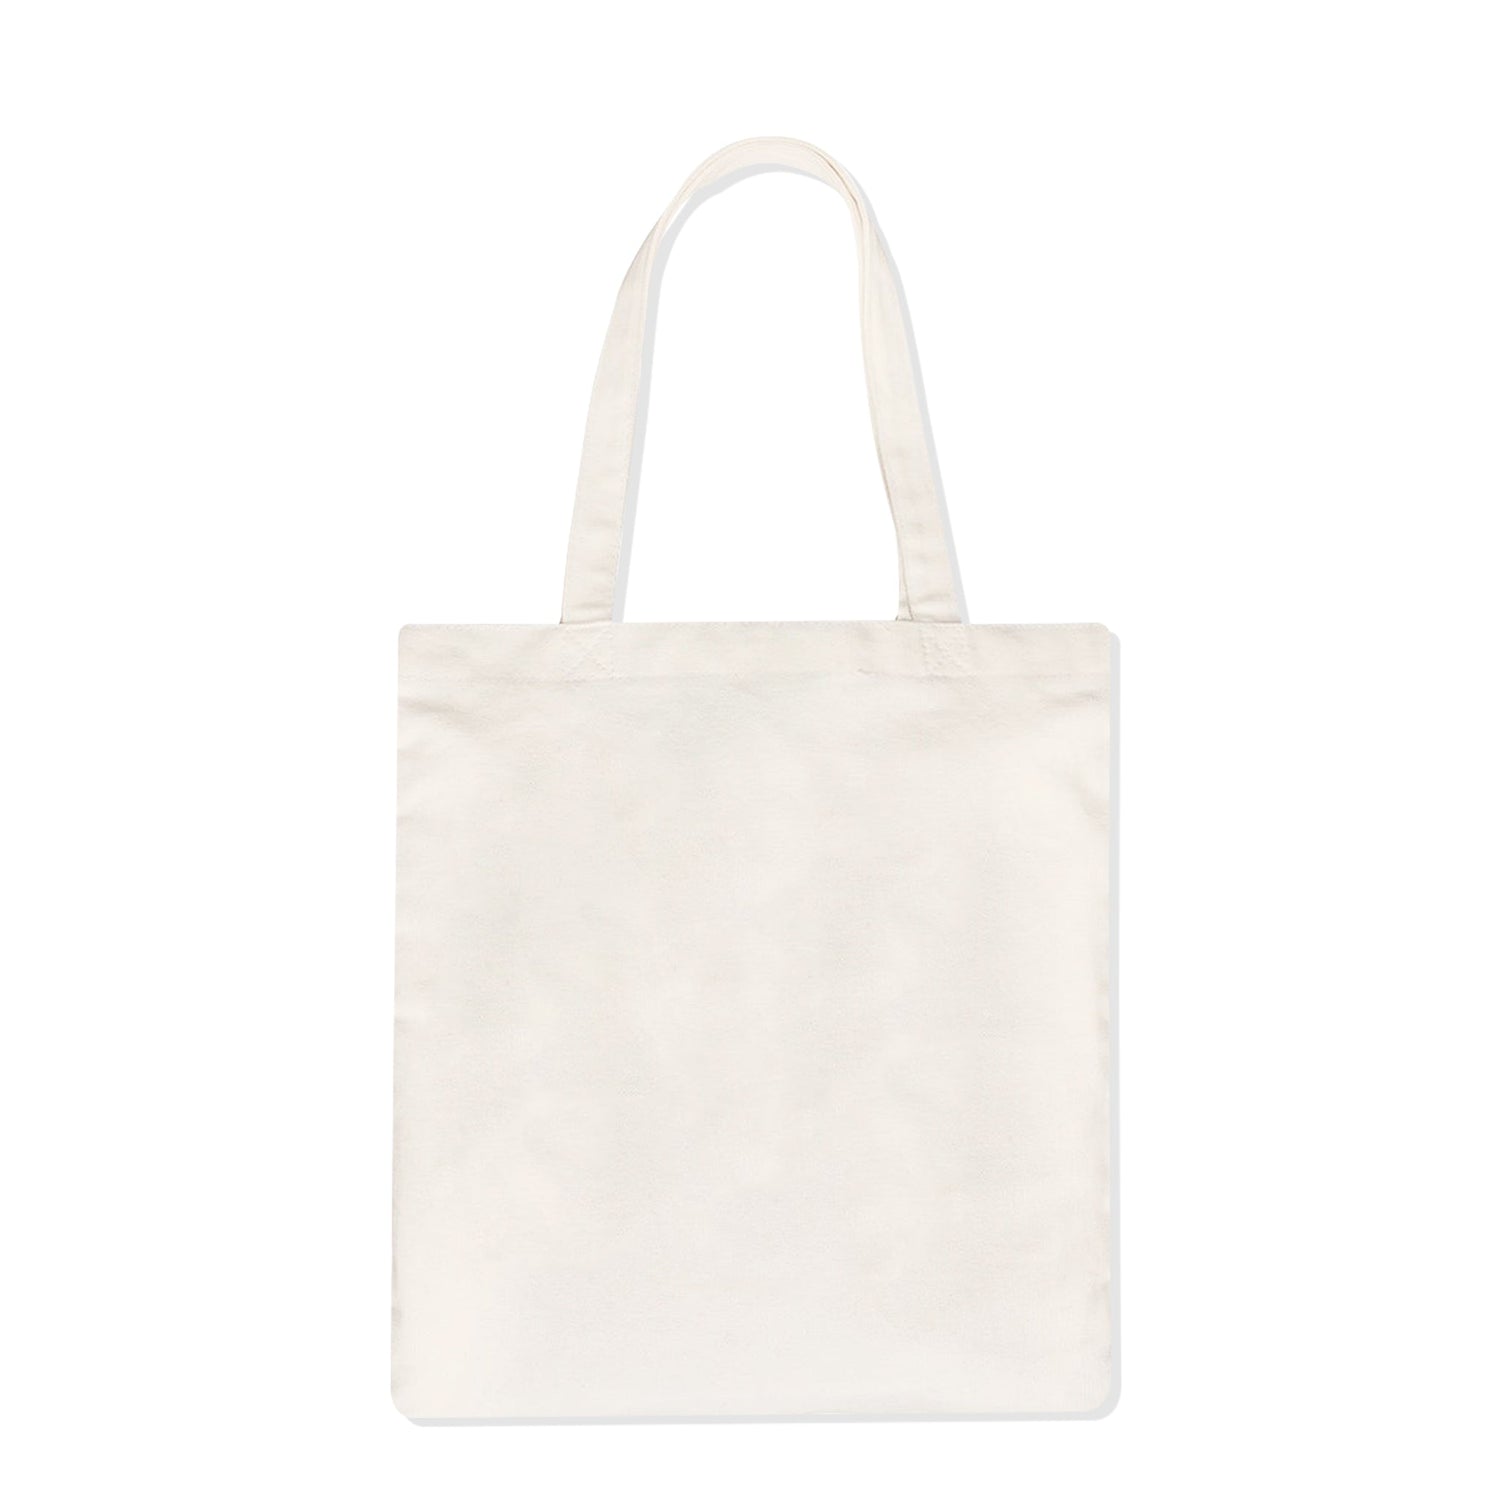 Round Peace Sign Natural Tote Bag - One Choice Apparel